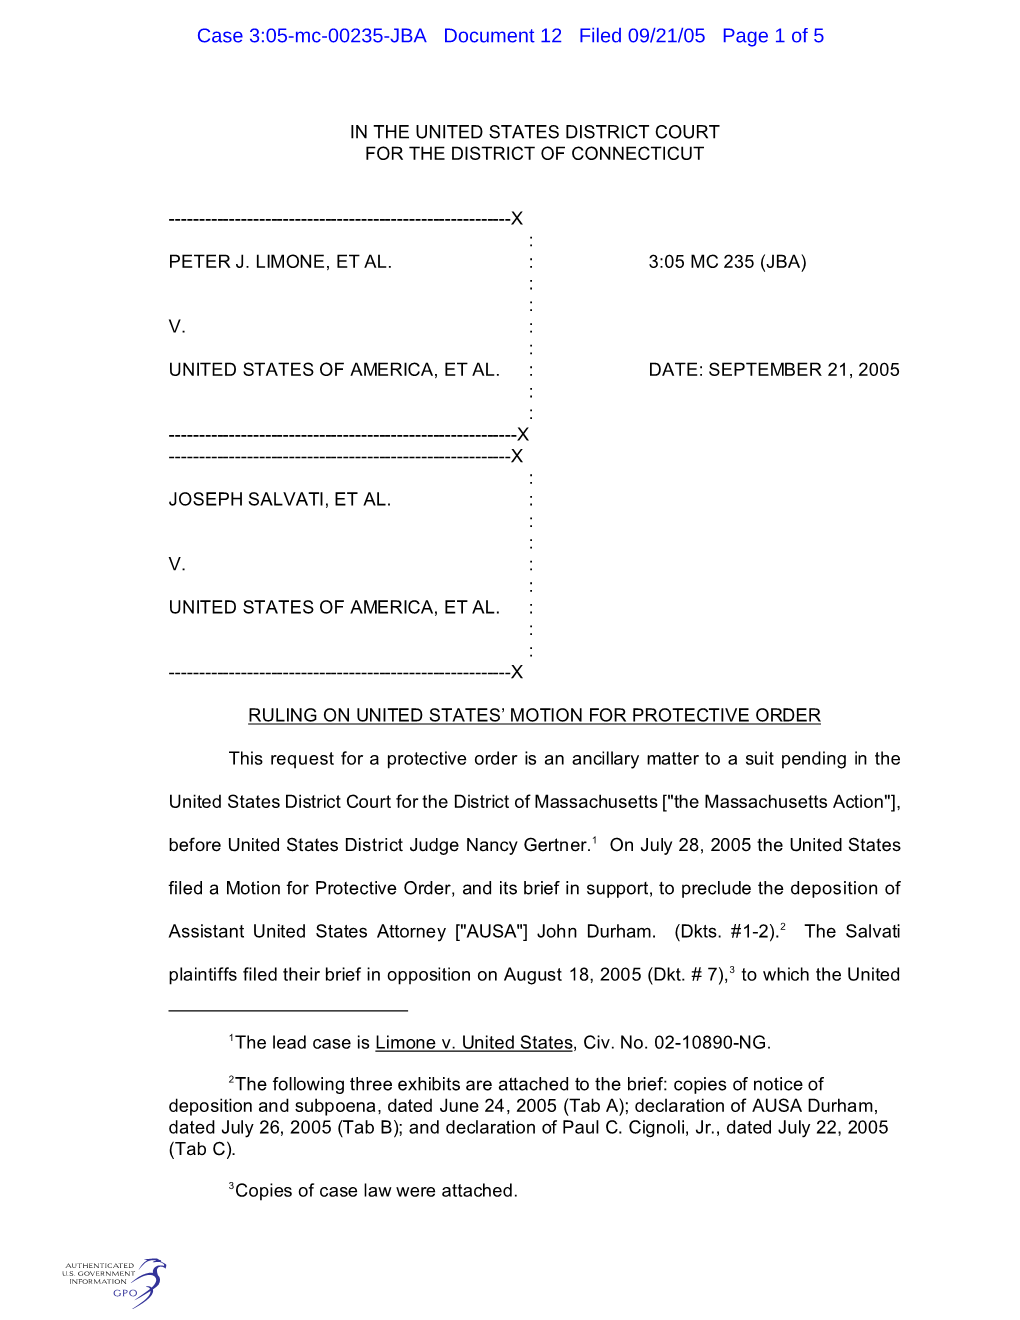 Case 3:05-Mc-00235-JBA Document 12 Filed 09/21/05 Page 1 of 5